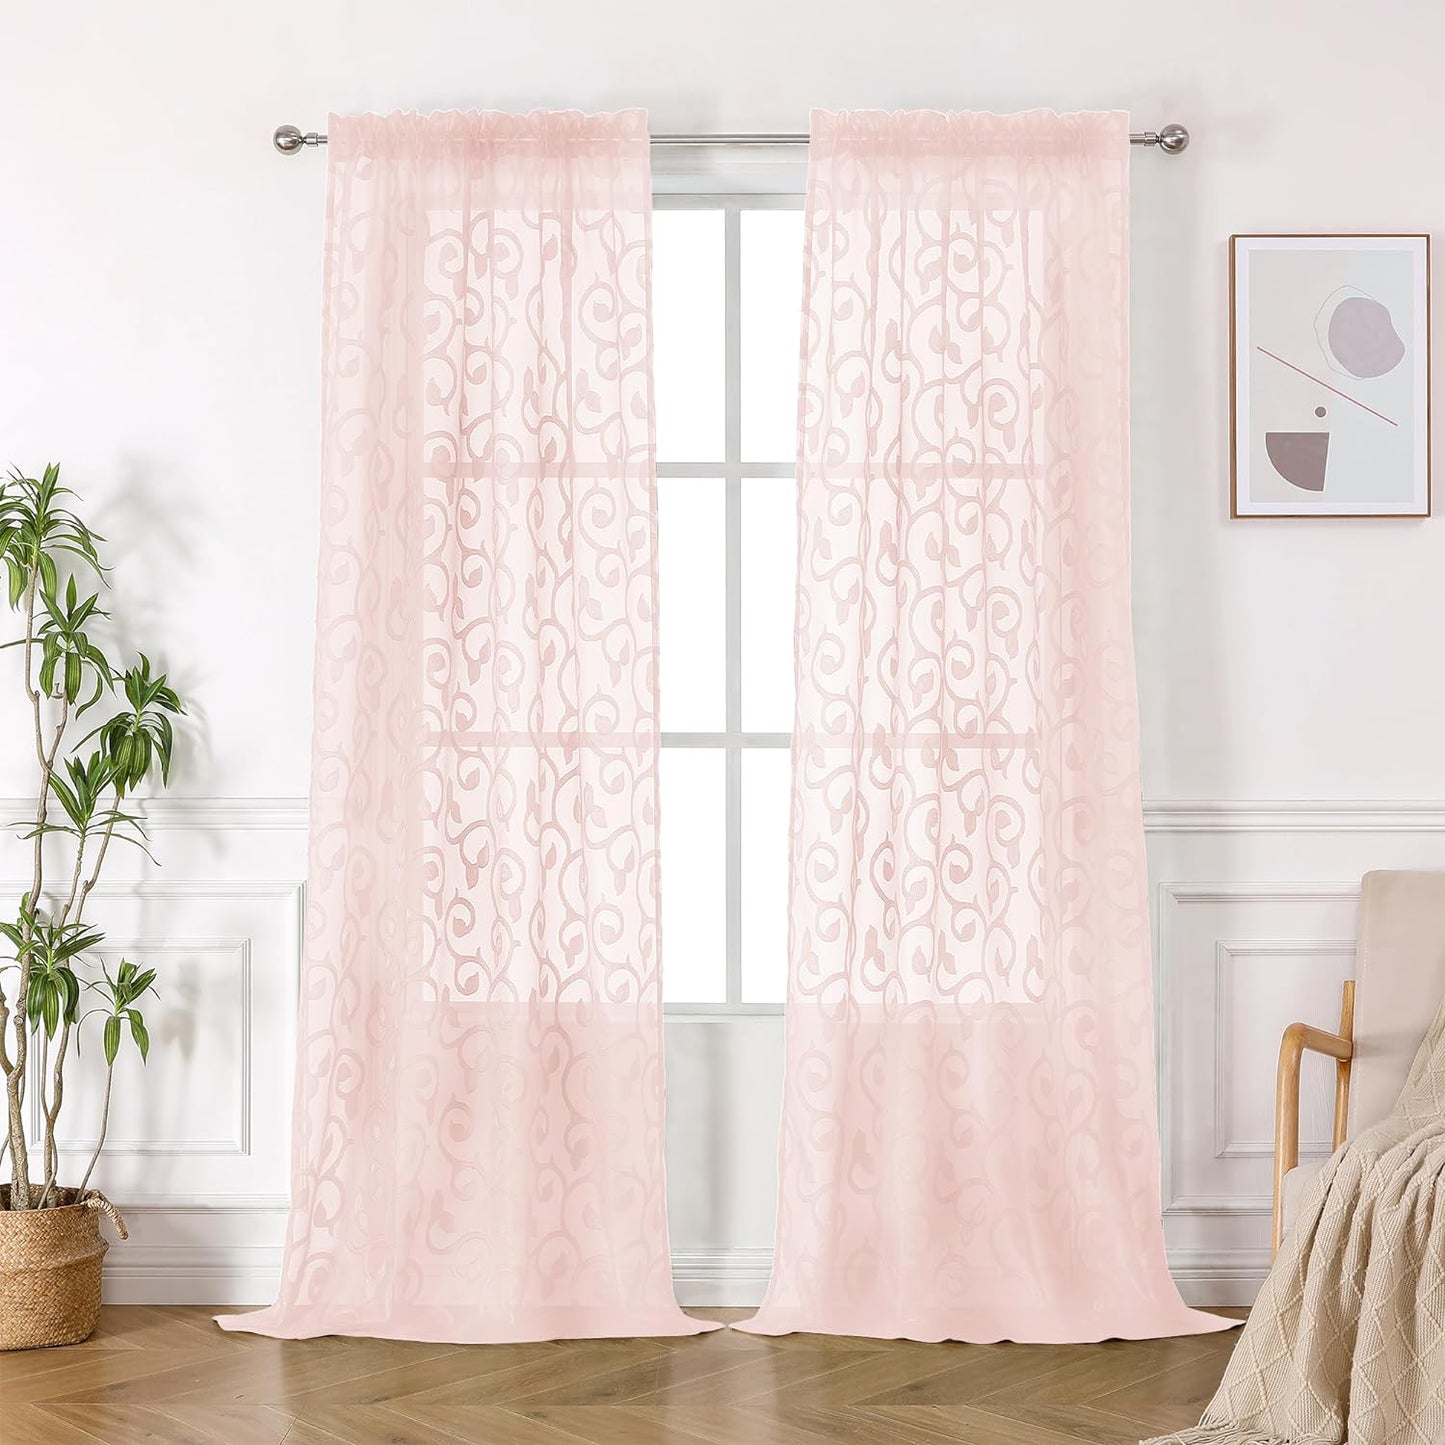 OWENIE Furman Sheer Curtains 84 Inches Long for Bedroom Living Room 2 Panels Set, Light Filtering Window Curtains, Semi Transparent Voile Top Dual Rod Pocket, Grey, 40Wx84L Inch, Total 84 Inches Width  OWENIE Blush 40W X 96L 